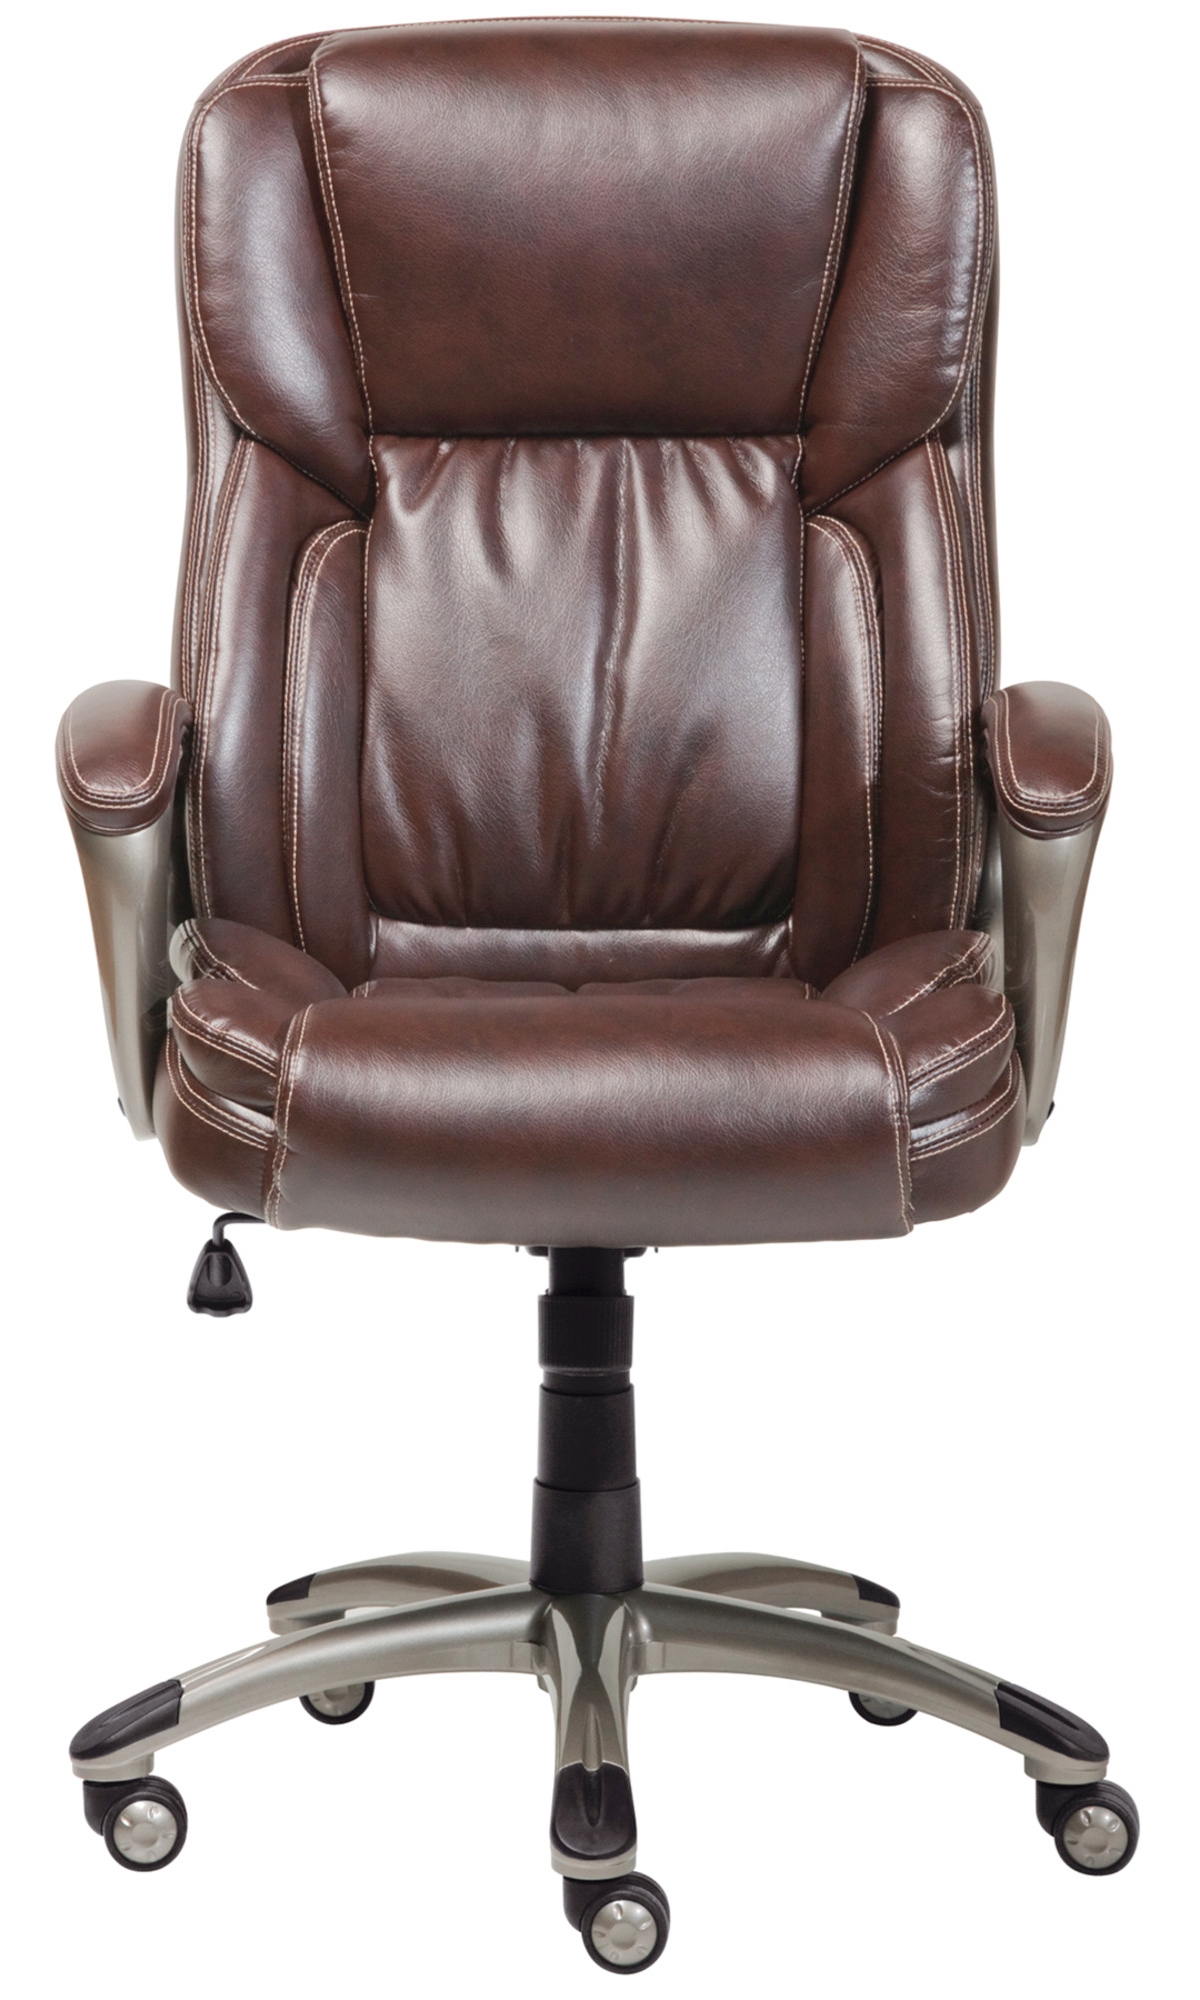 Serta Works Executive Office Chair In Brown